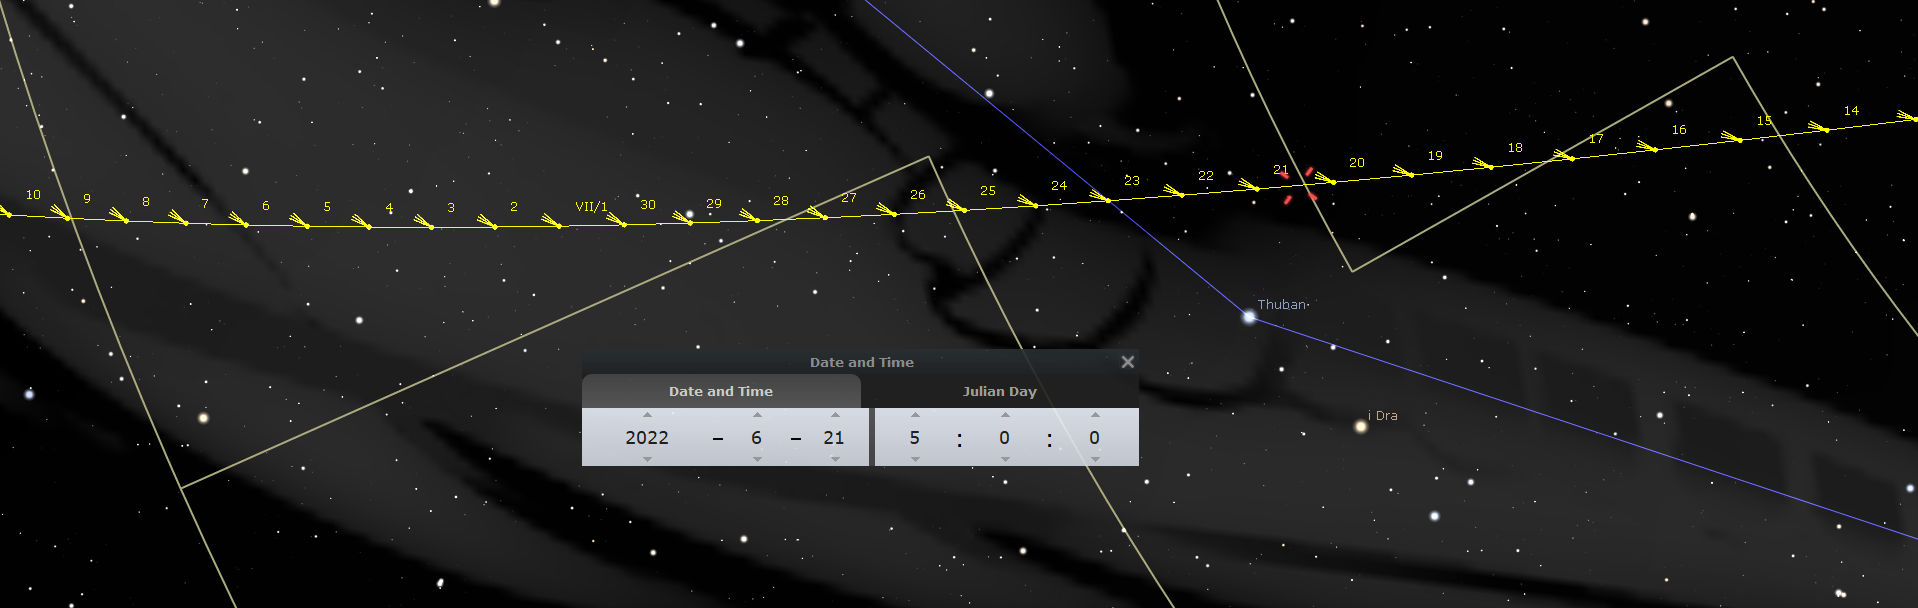 Detail of the trajectory of comet PanSTARRS